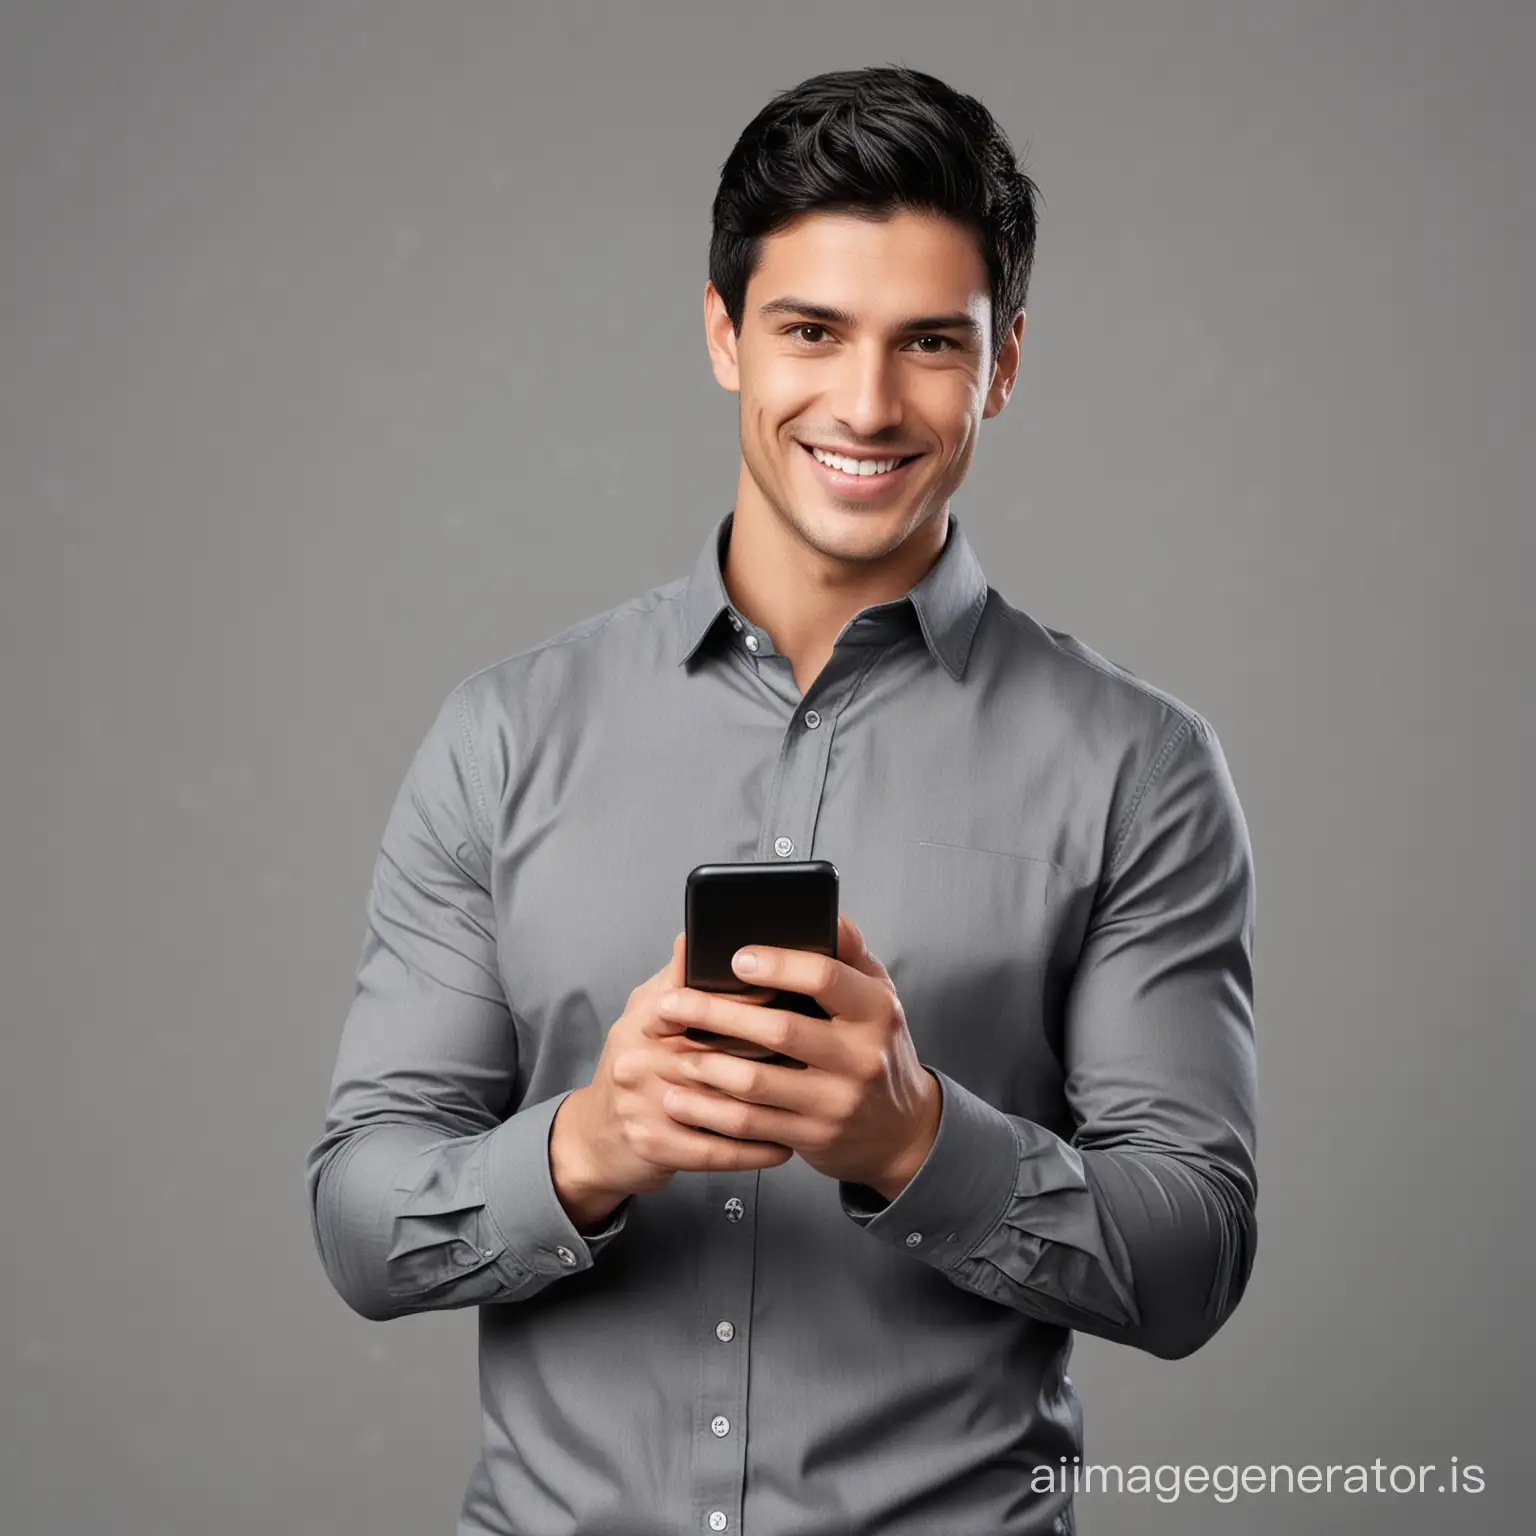 ultrarealistic photo of a brunette business young 25 man with black hair with a mobile in hand looking for camera, using a V grey shirt by side looking for camera in half body with smile and confident